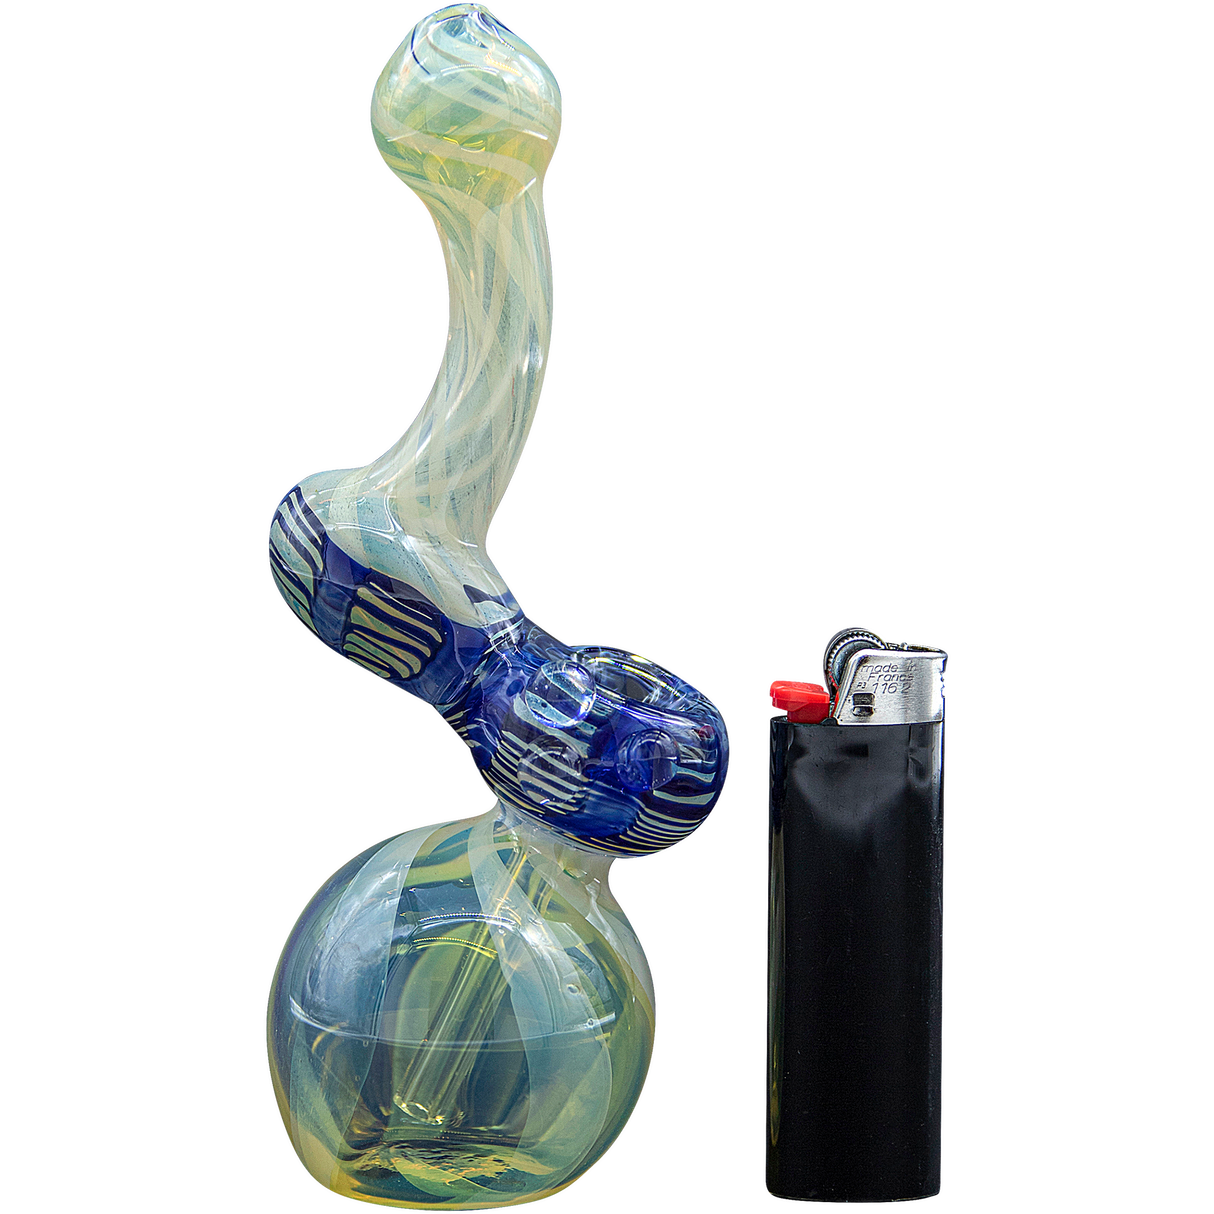 LA Pipes "Rake Bubb" Fumed Sherlock Bubbler Pipe in Blue, Front View with Lighter